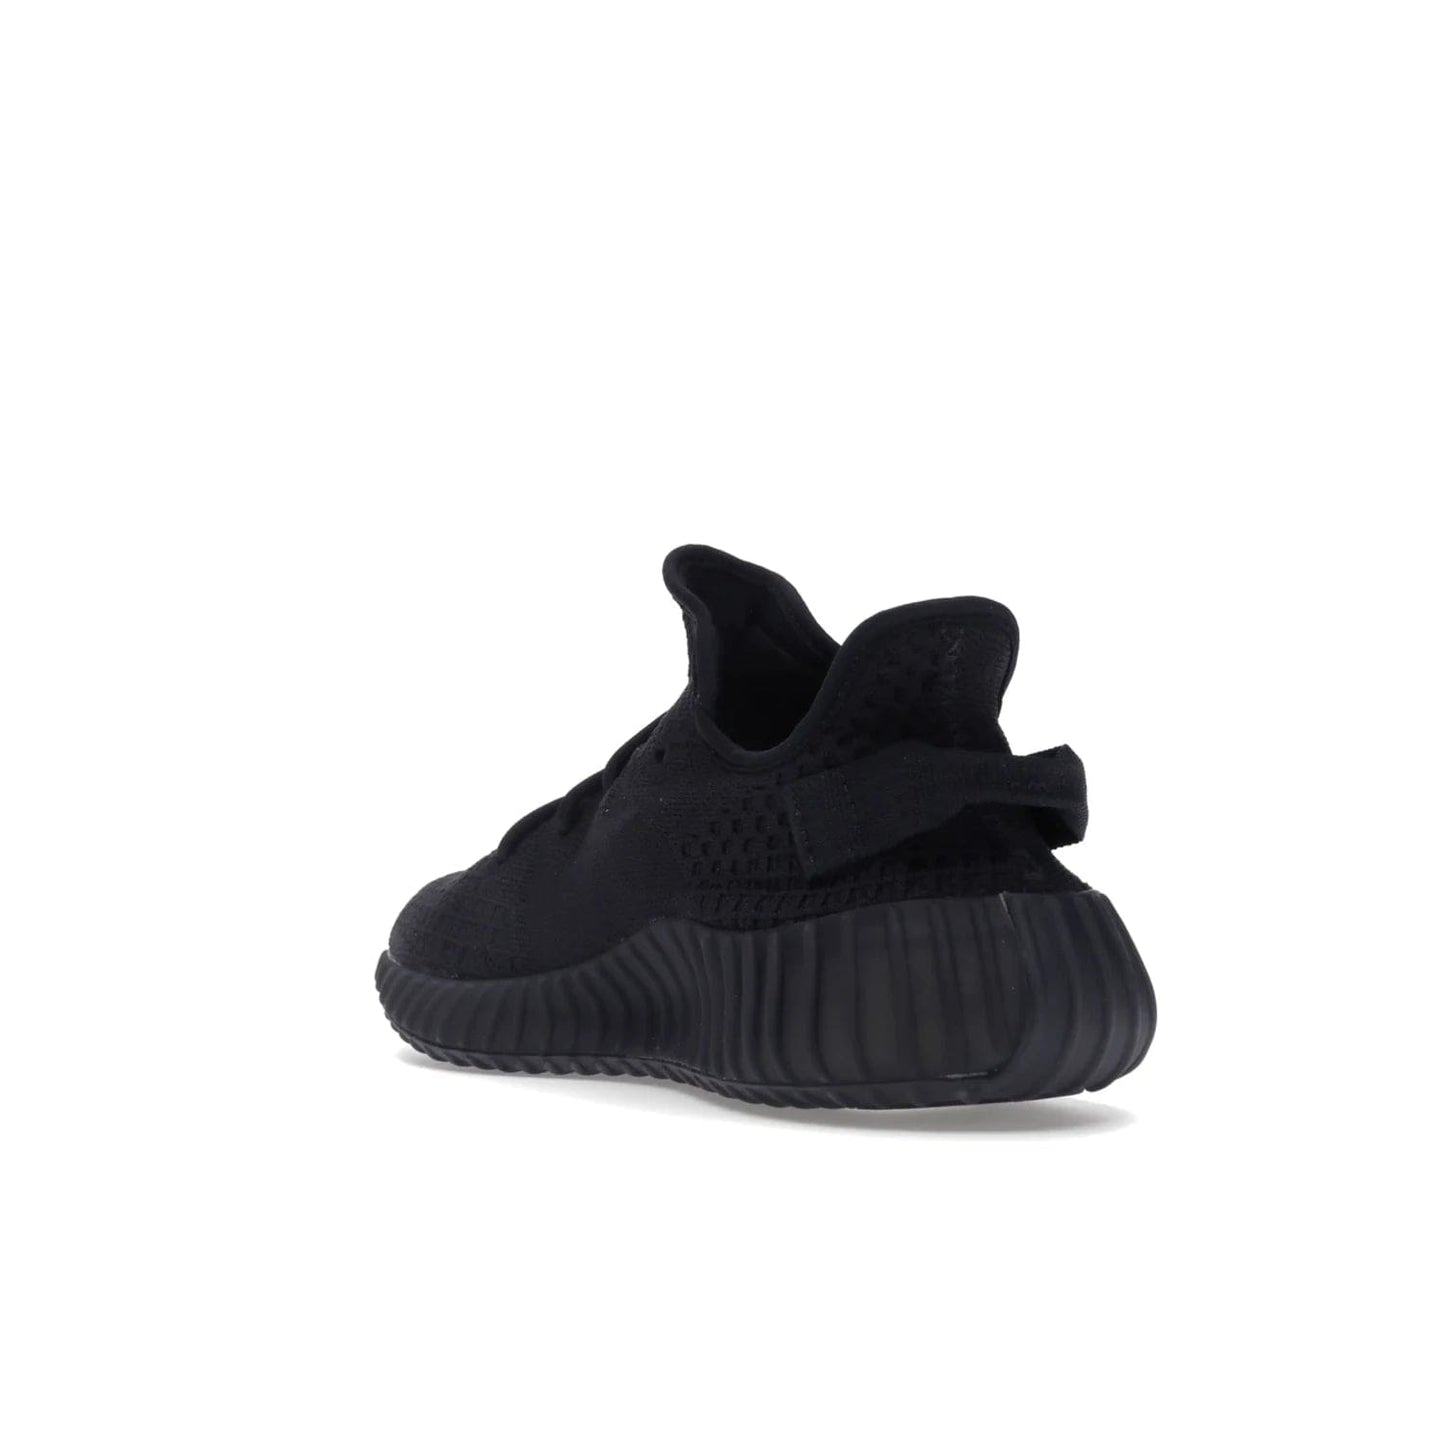 adidas Yeezy Boost 350 V2 Onyx - Image 25 - Only at www.BallersClubKickz.com - Adidas Yeezy Boost 350 V2 Onyx Triple Black shoes for comfort and style. Arriving Spring 2022.